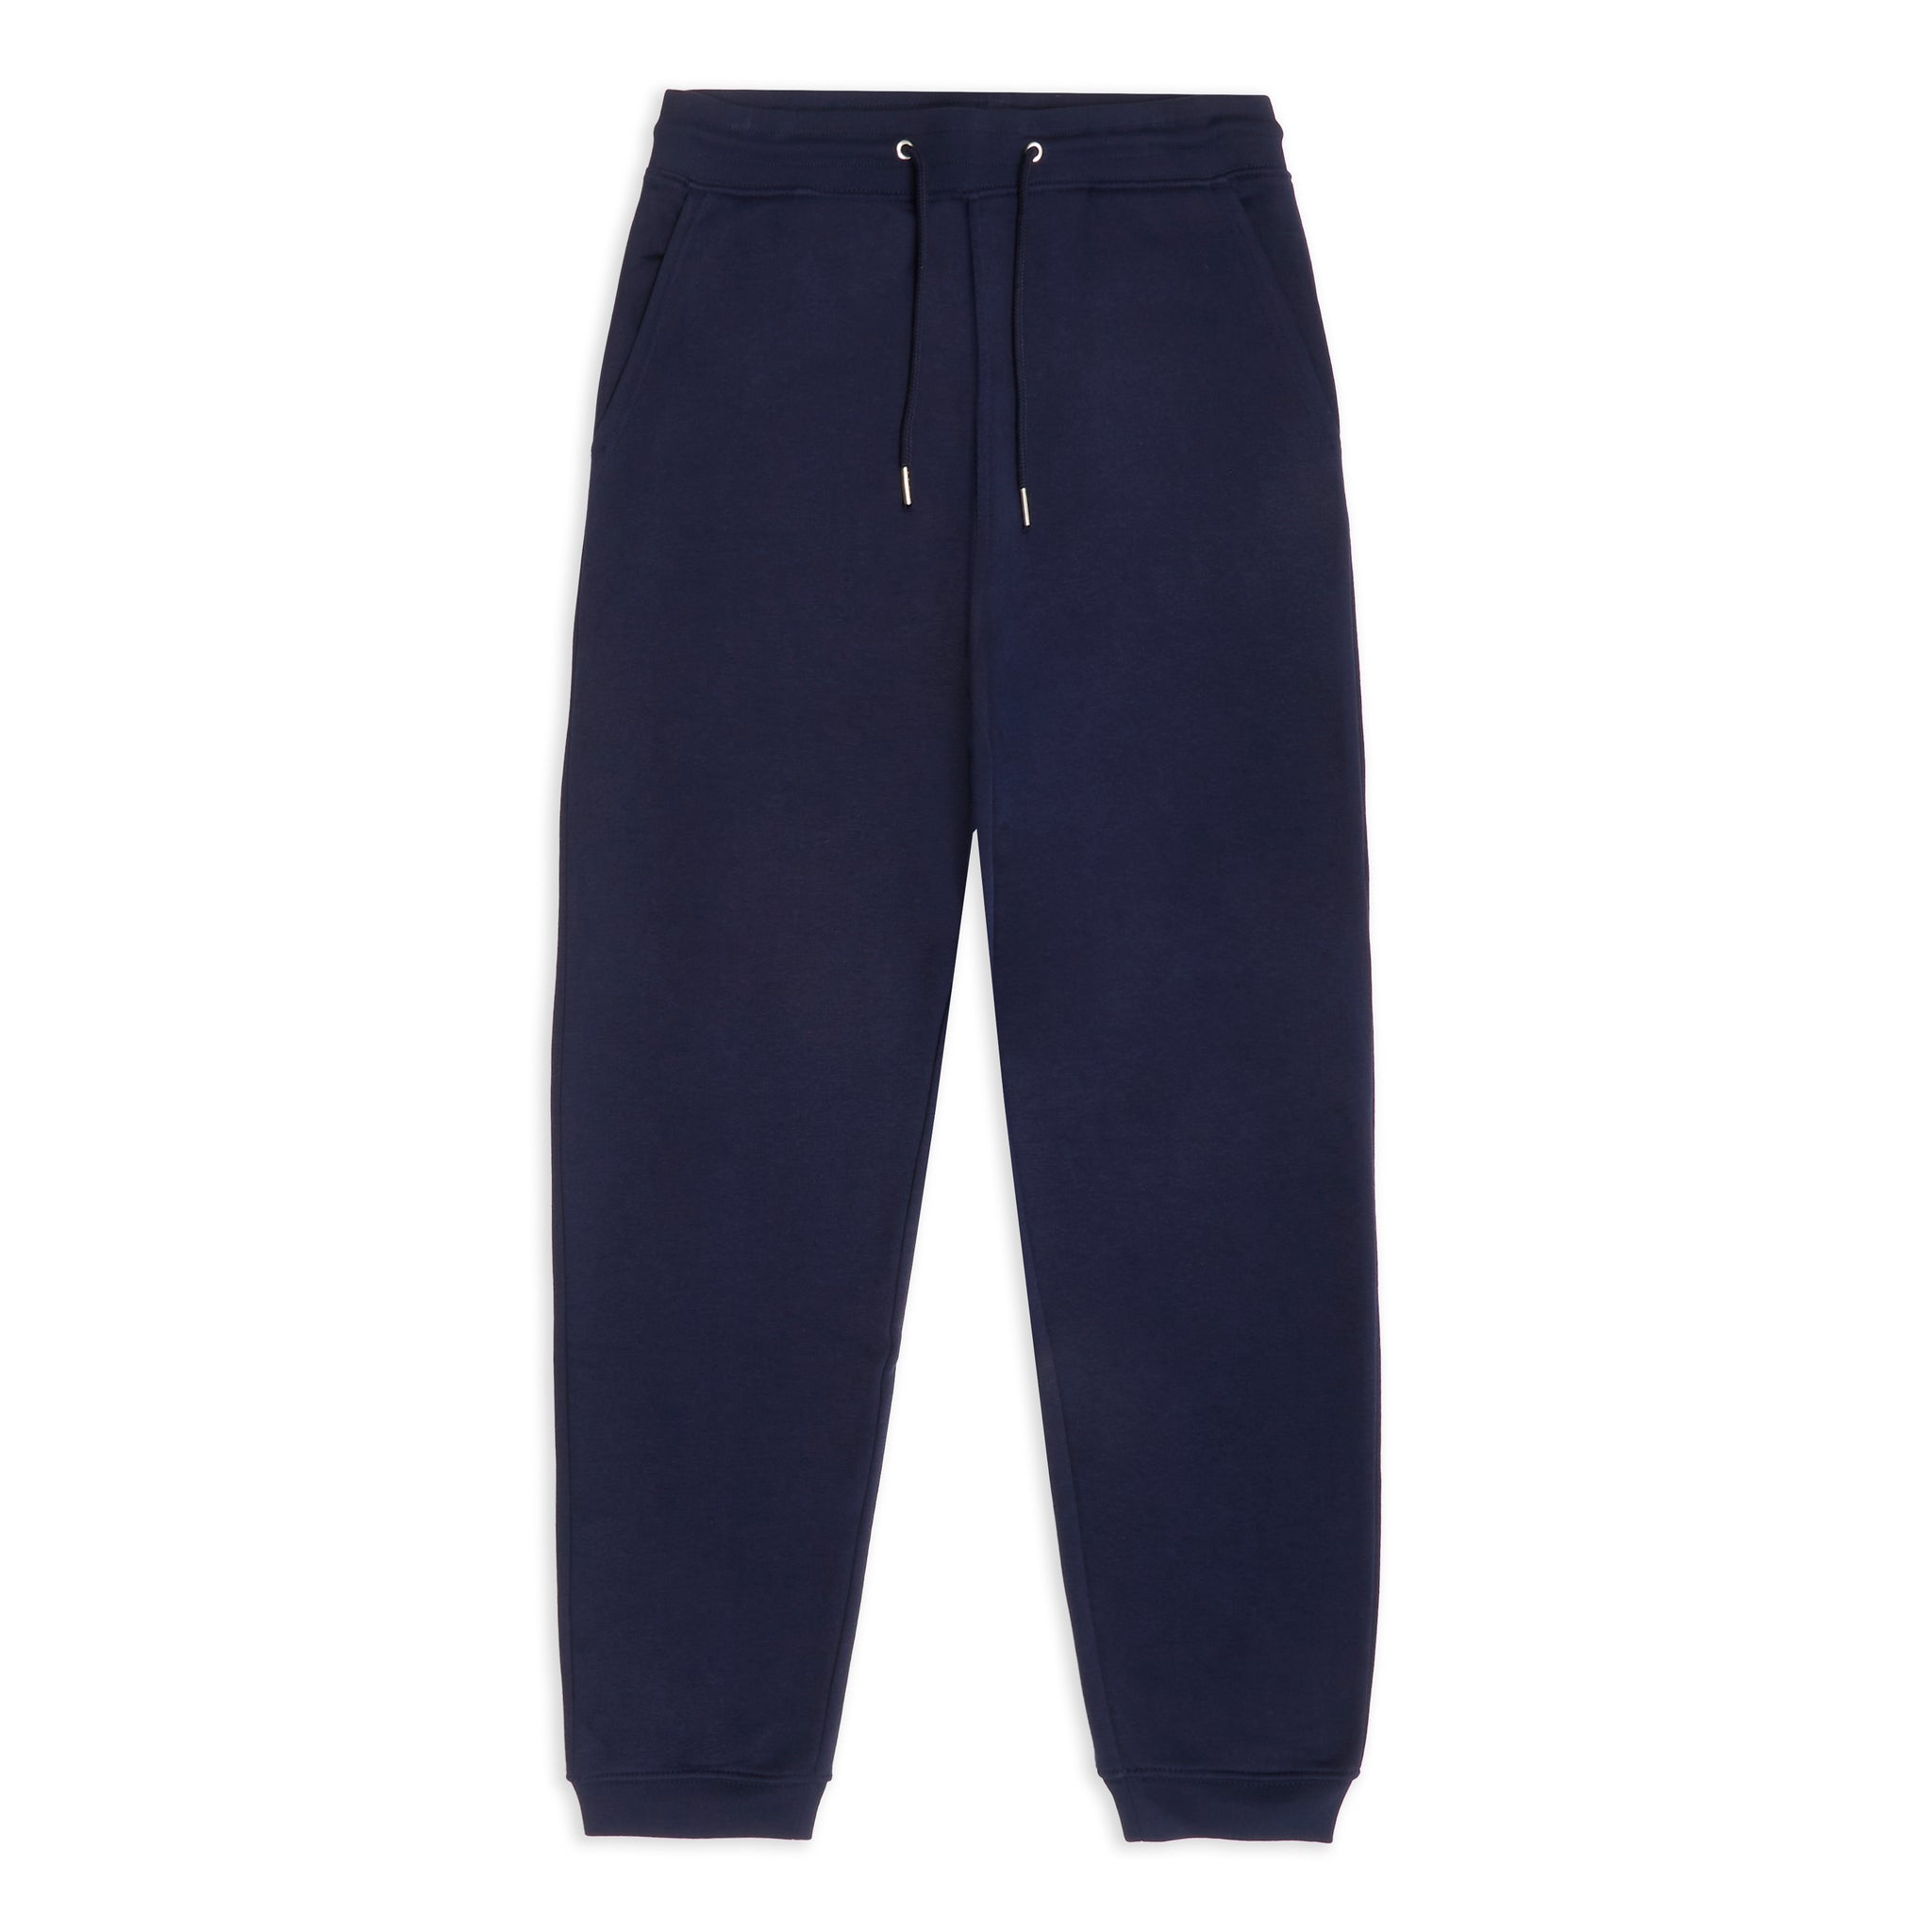 Classic Navy 30 Year™ Tracksuits